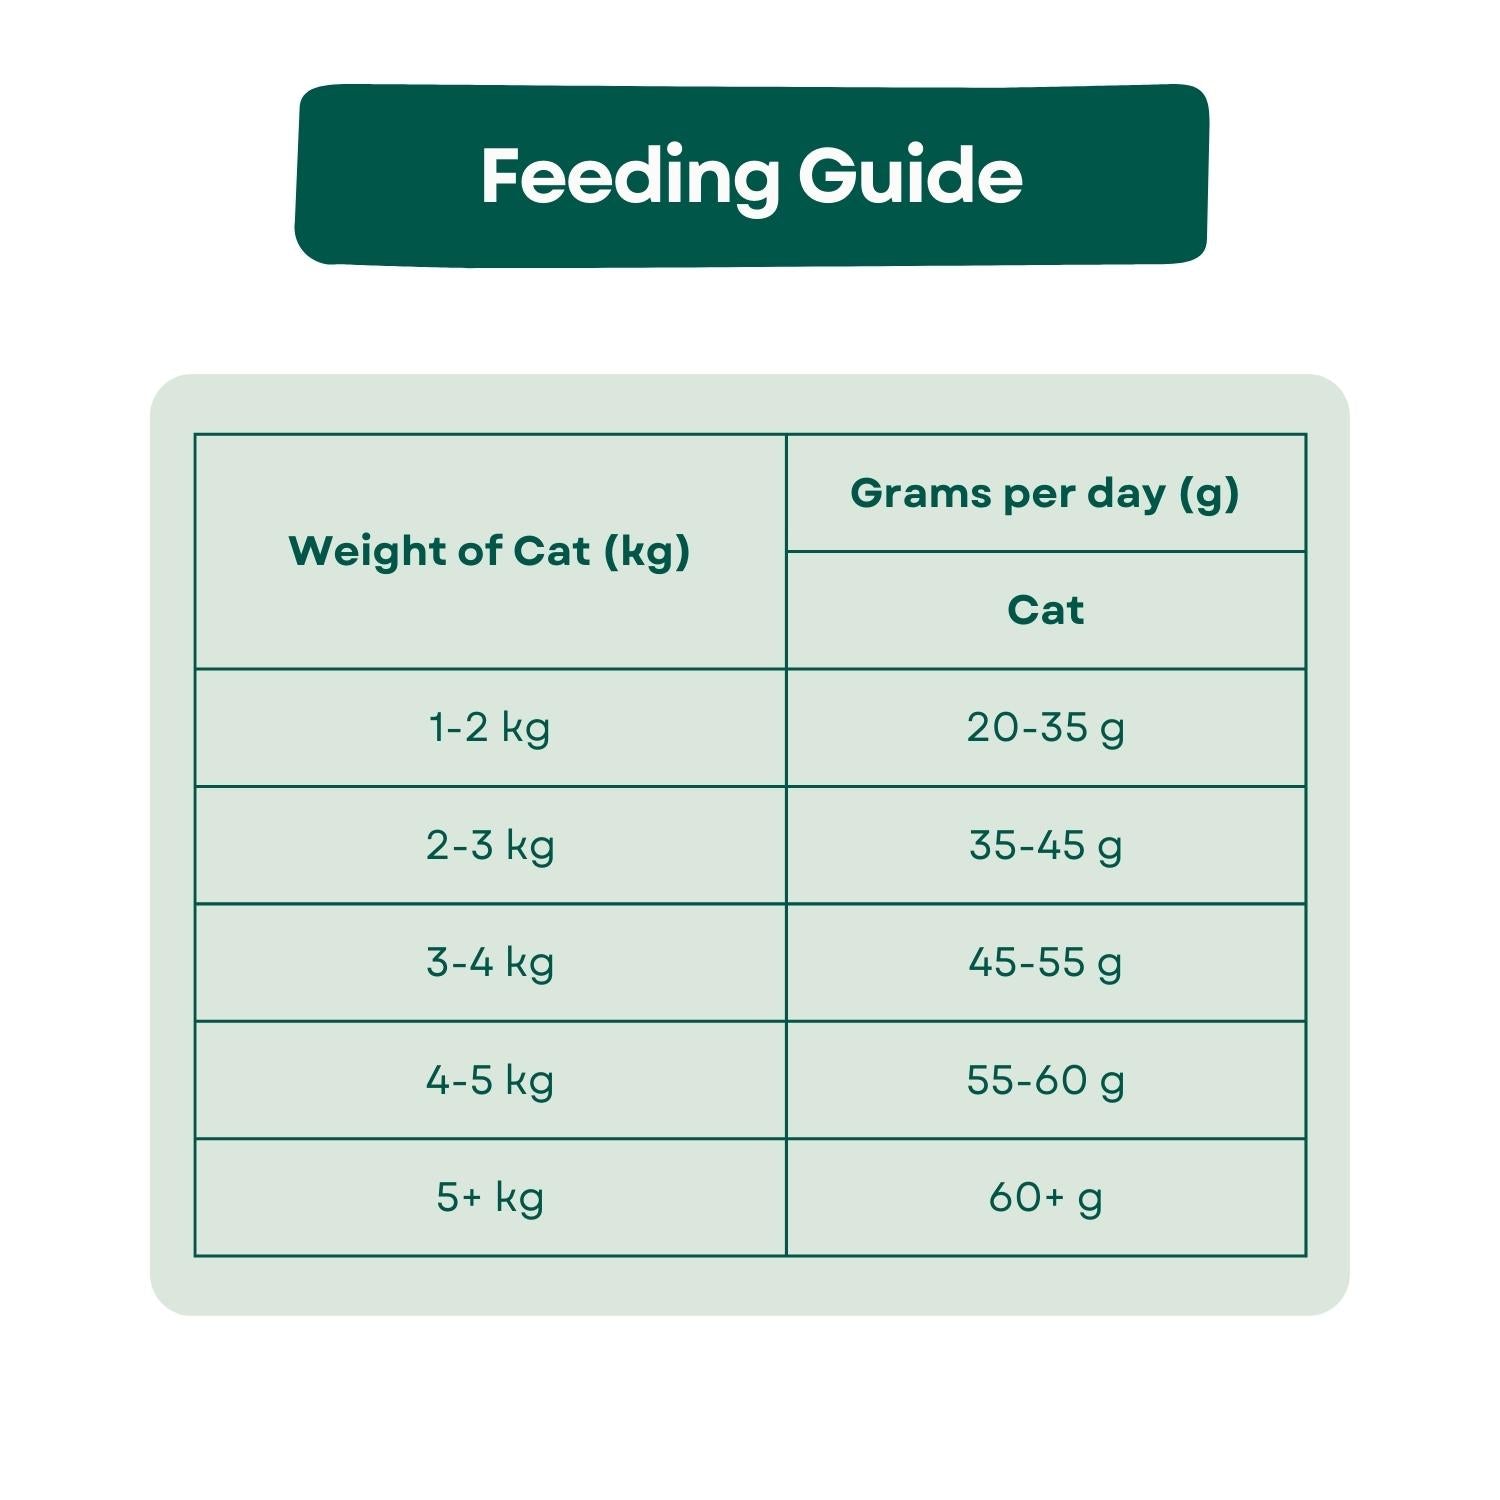 Feeding Guide Connoisseur Grain Free Sterilised Adult Cat Food - White Fish with Herring Caviar